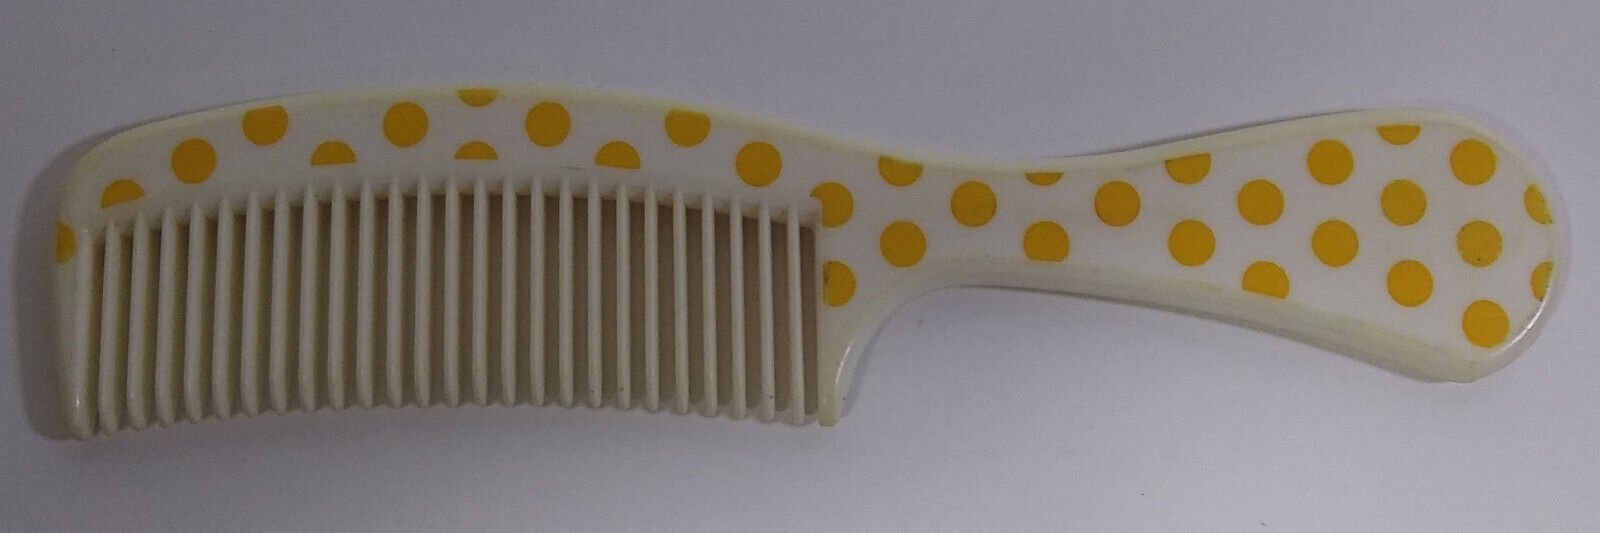 Primary image for Disney Avon Minnie Mouse Comb 6in Polka Dot 1990 Hair Vintage Yellow White Girls